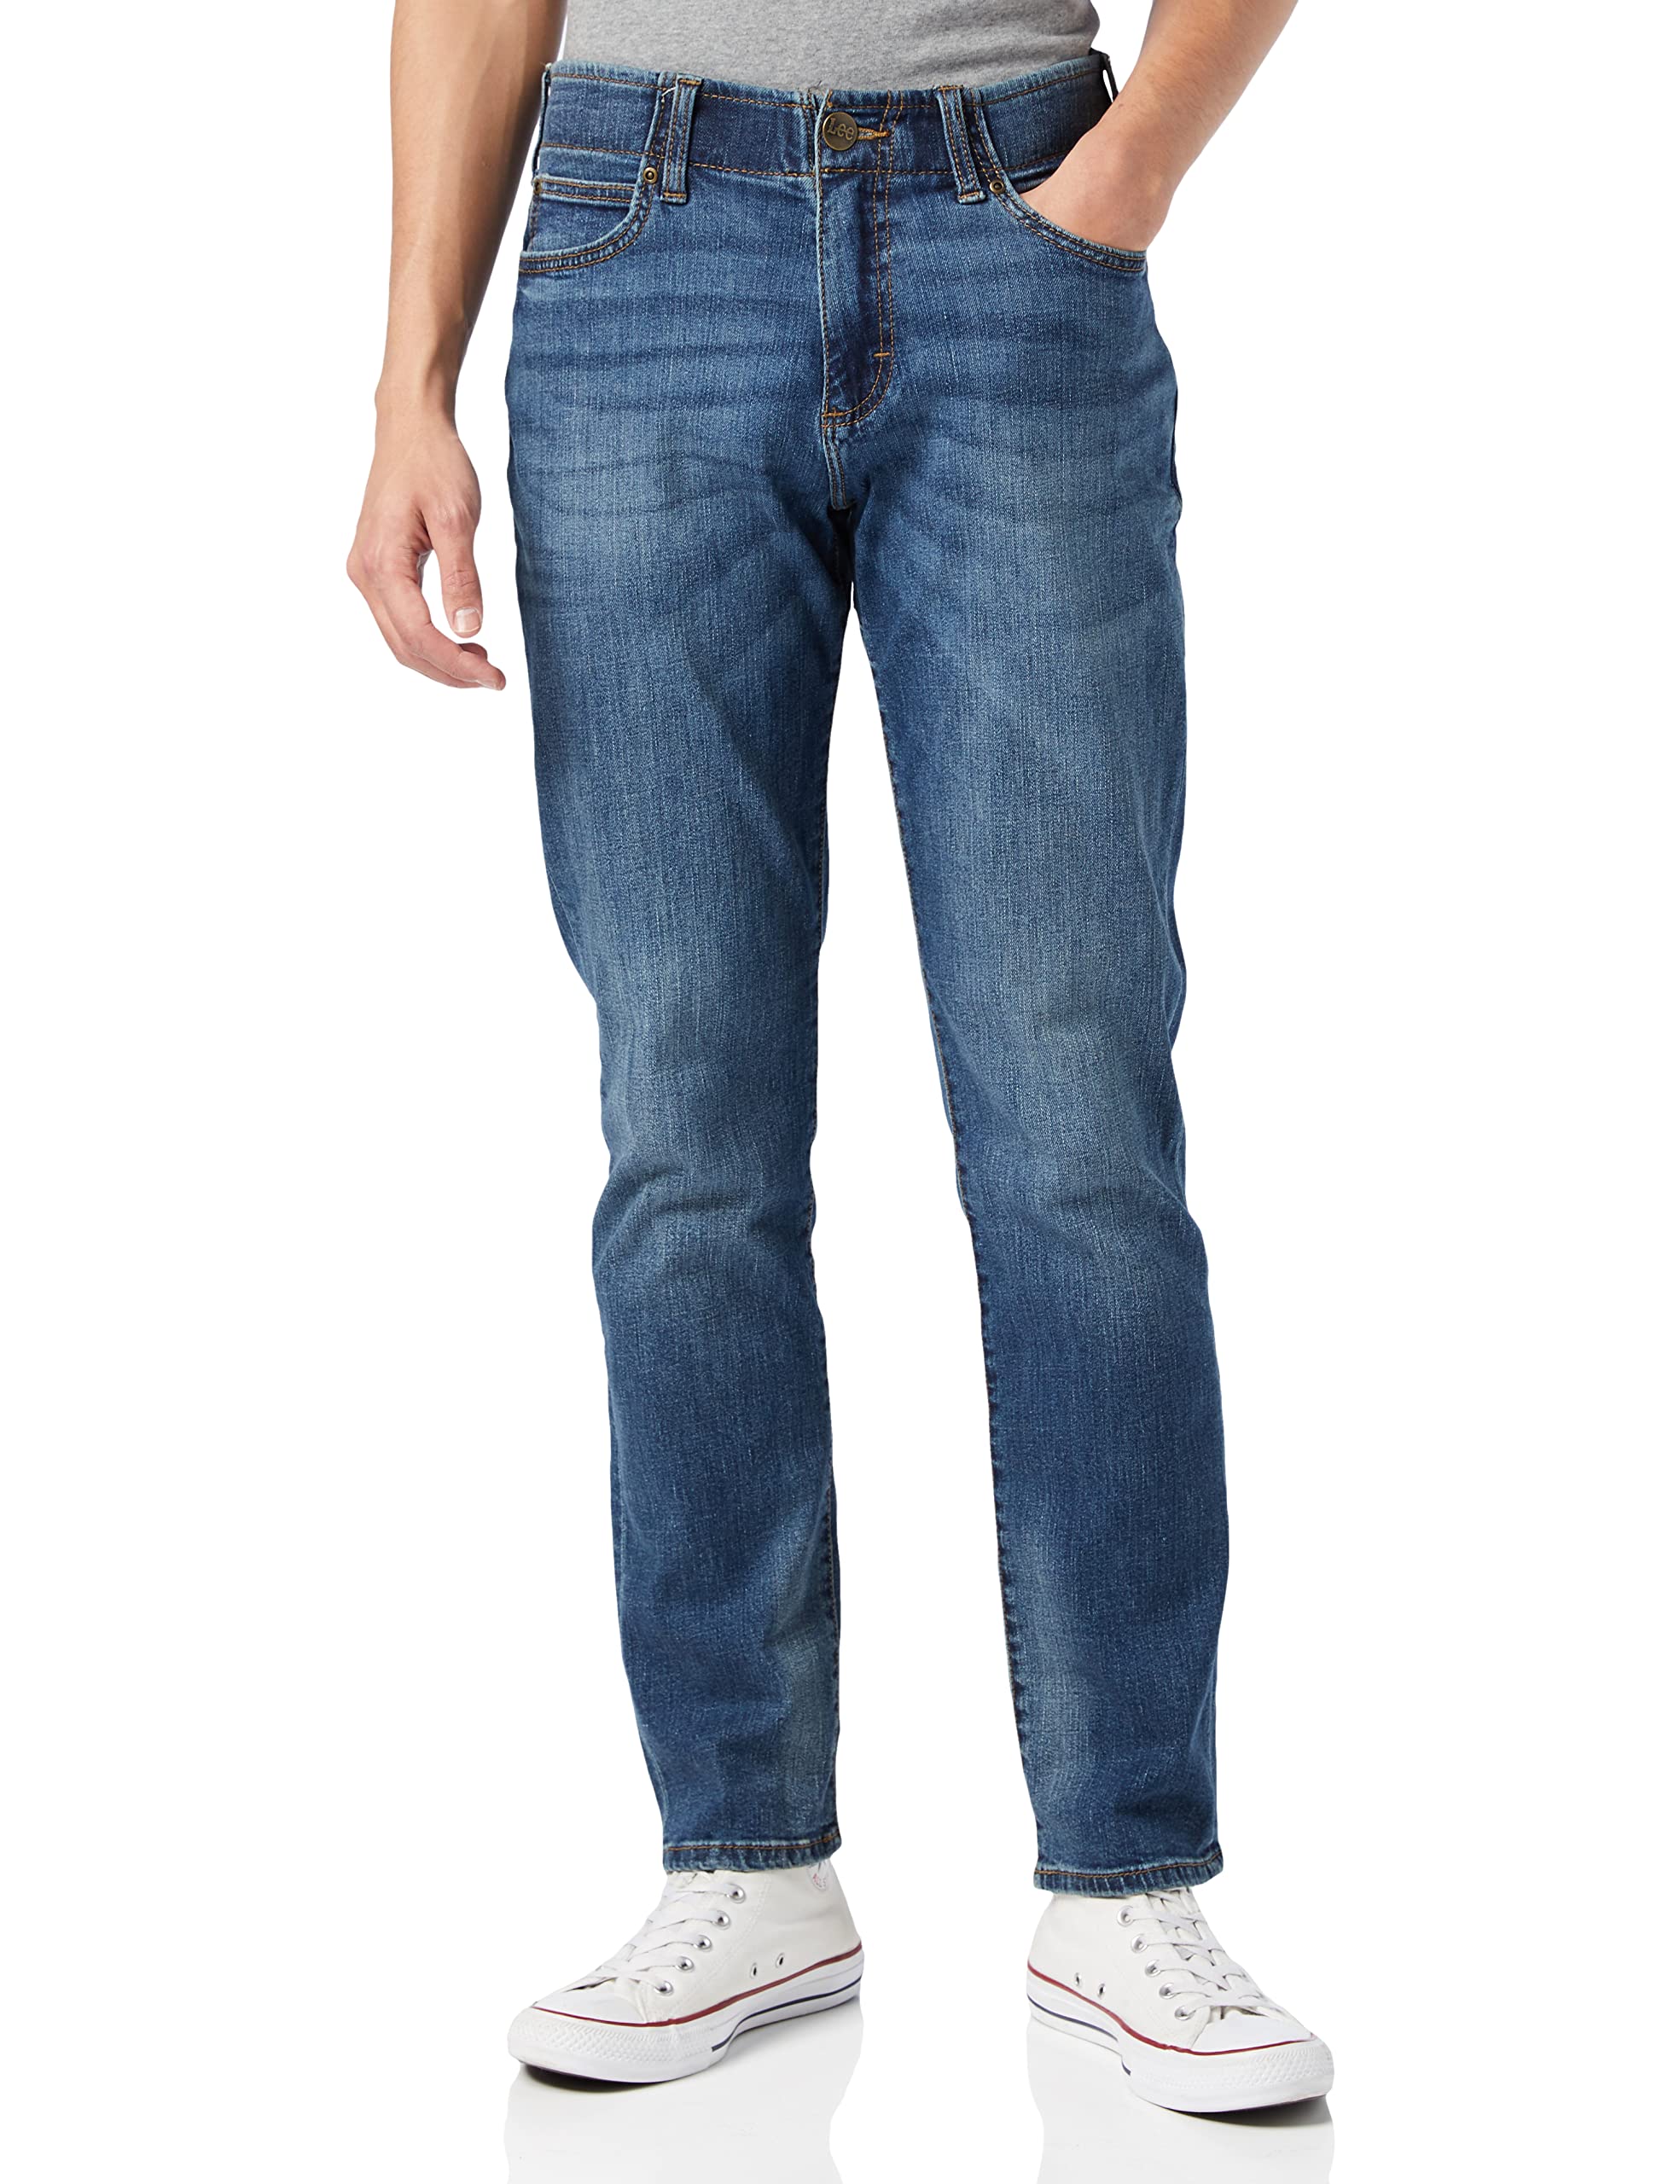 Lee Herren Straight Fit Xm Extreme Motion Jeans, Maddox, 34W / 34L